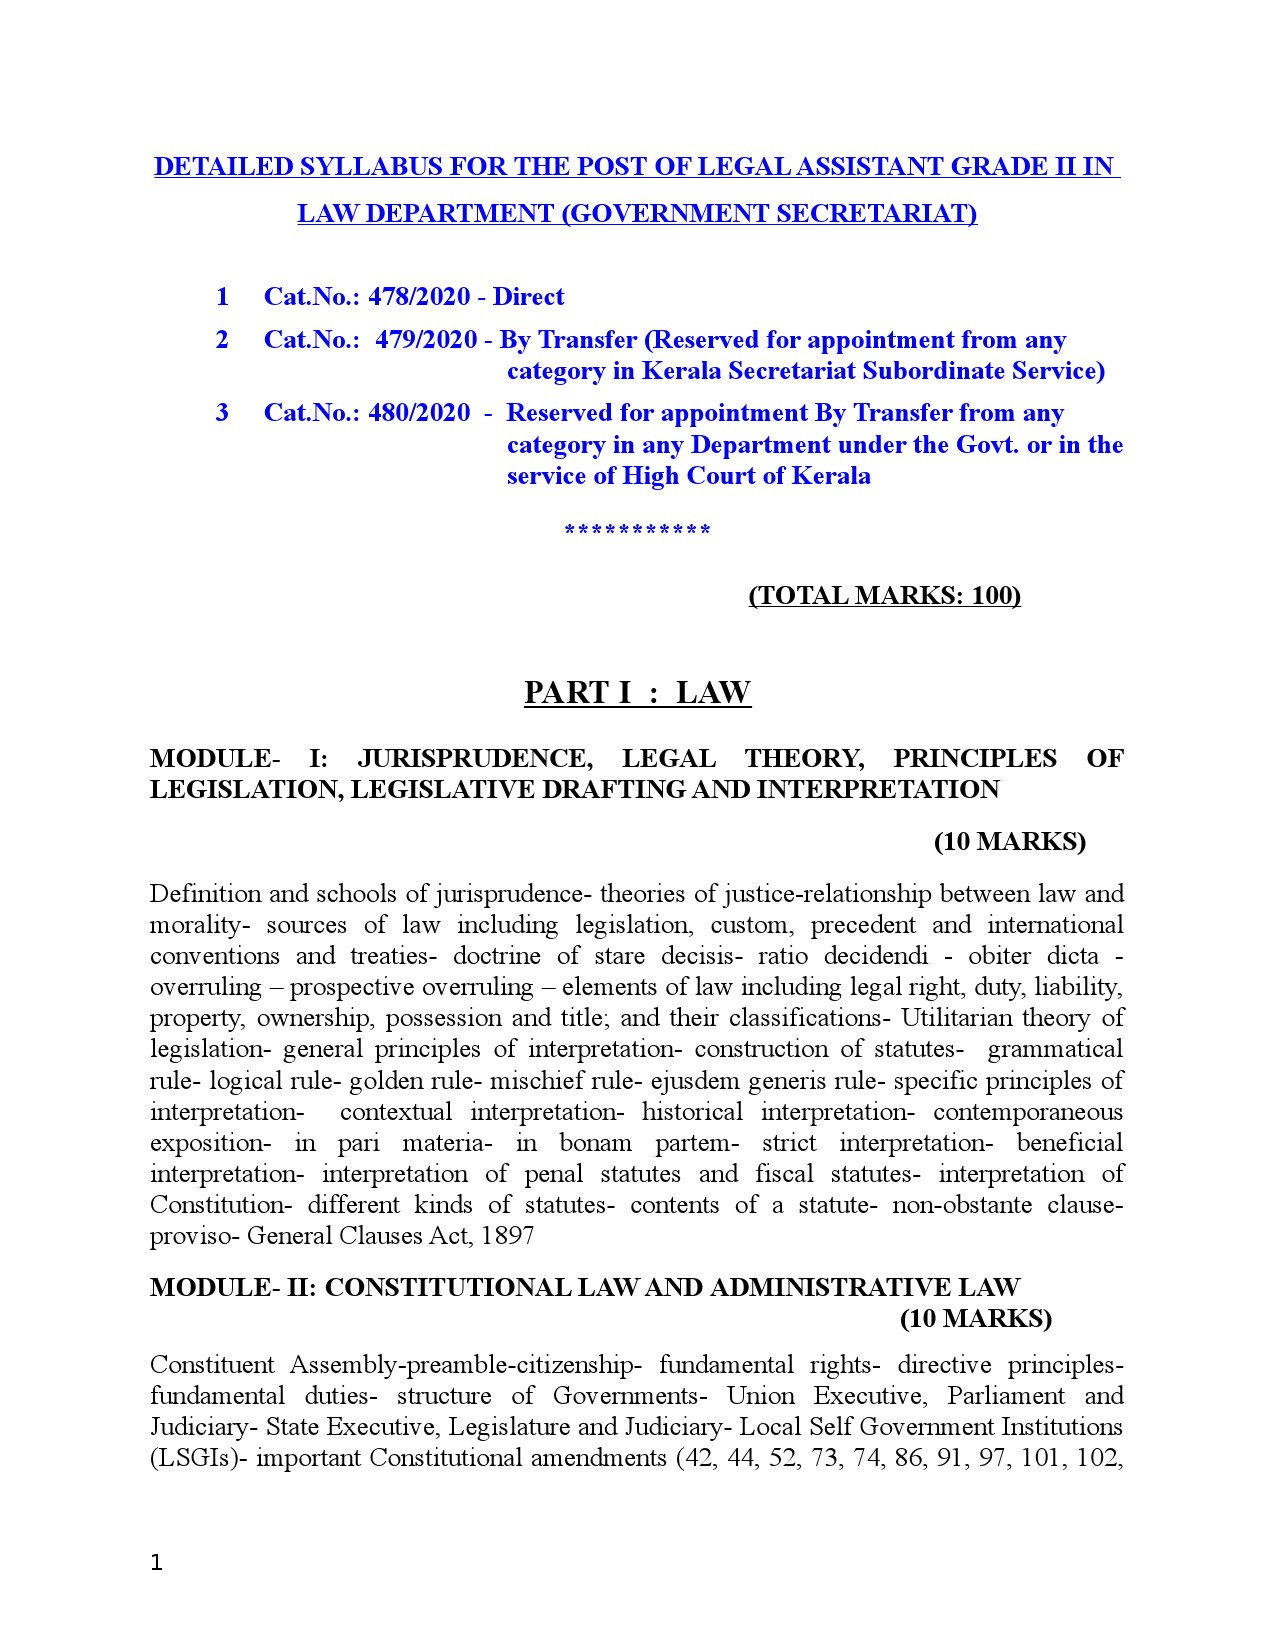 KPSC SYLLABUS FOR LEGAL ASSISTANT GRADE II IN LAW DEPARTMENT - Notification Image 1